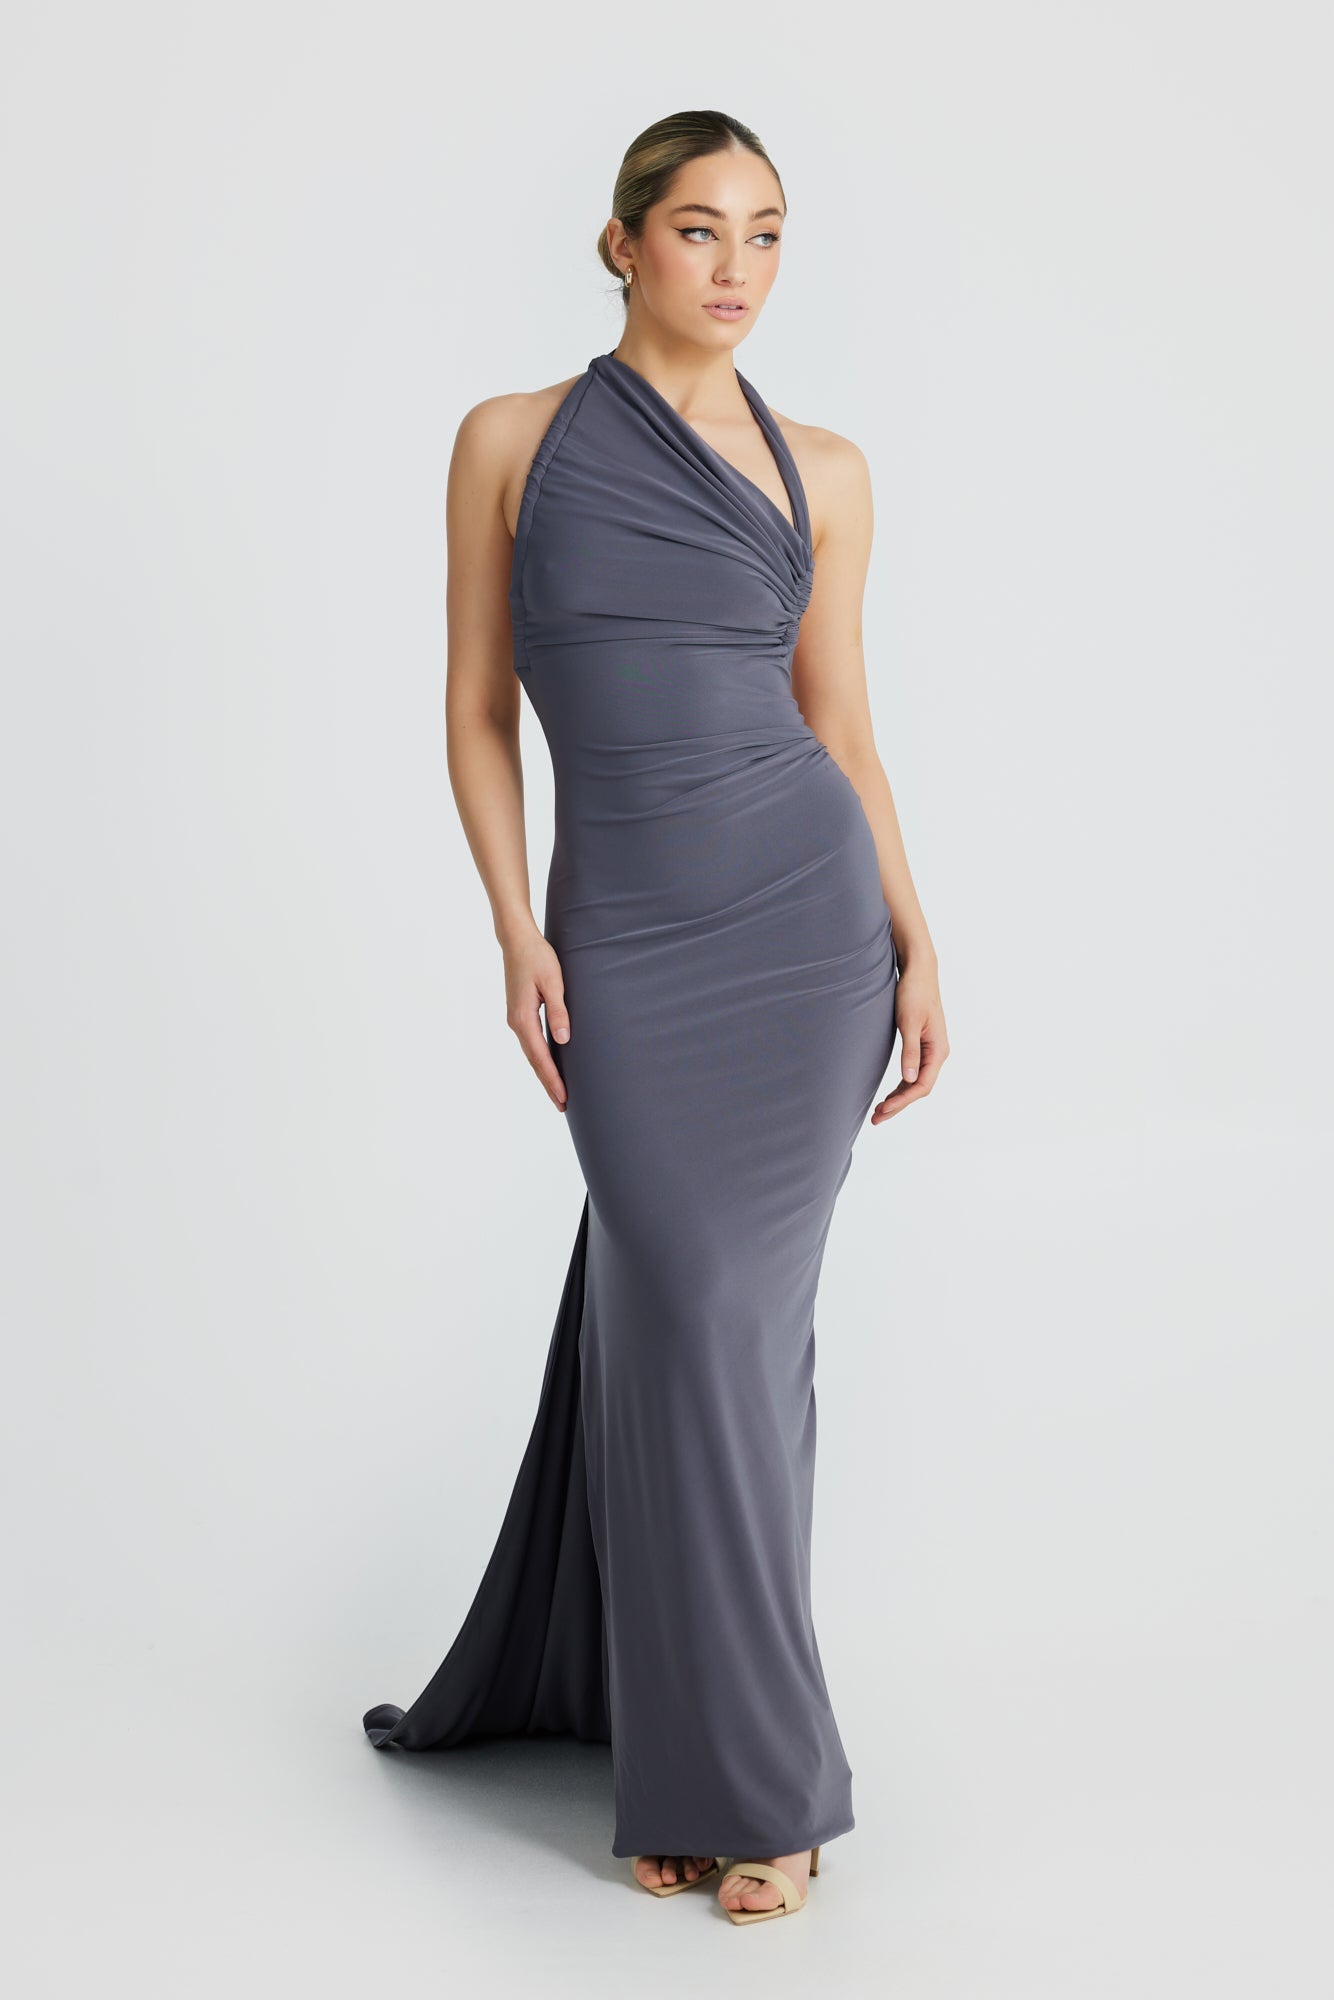 MÉLANI The Label IVANA Slate Grey Multi Tie Fitted Formal Dress